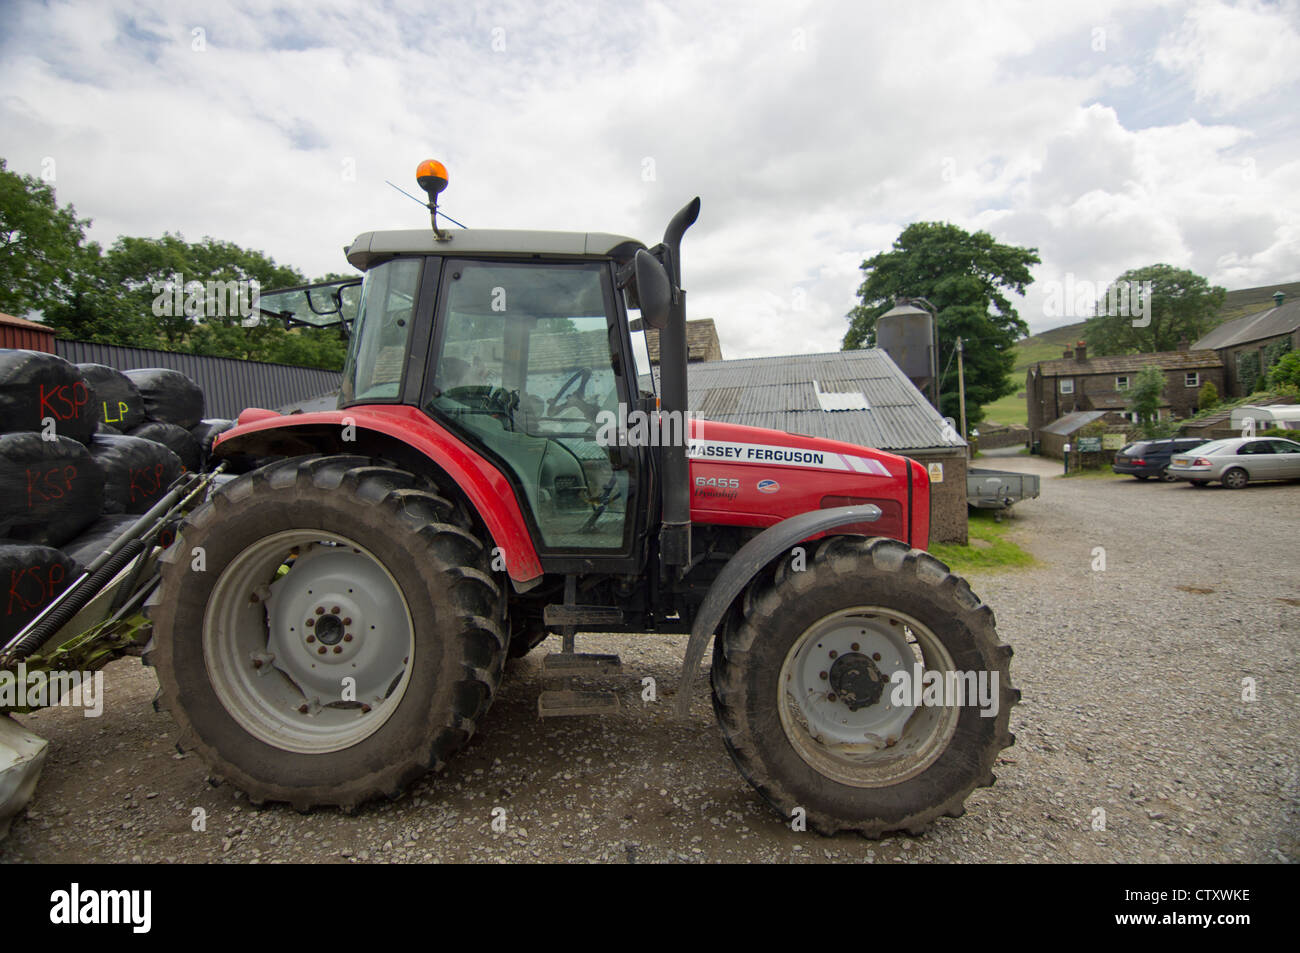 Large farming tractor Stock Photo